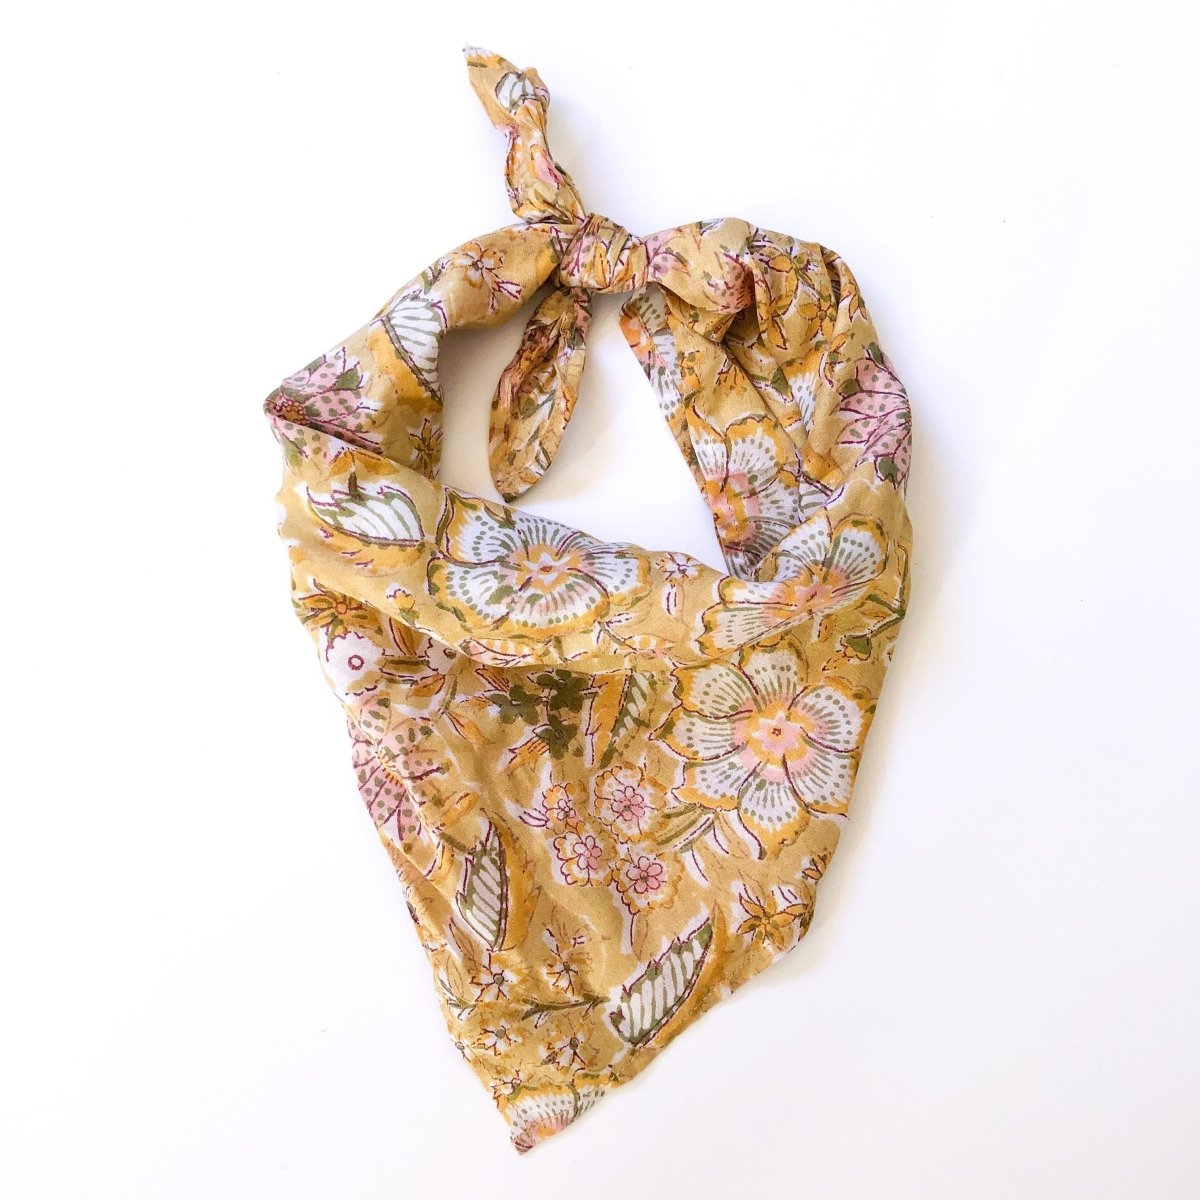 A yellow, pink, white and green floral patterned bandana, folded over and tied in a knot. Block printed by hand, the Harlowe Bandana from Maelu is designed in Portland, Oregon ad handmade in India.